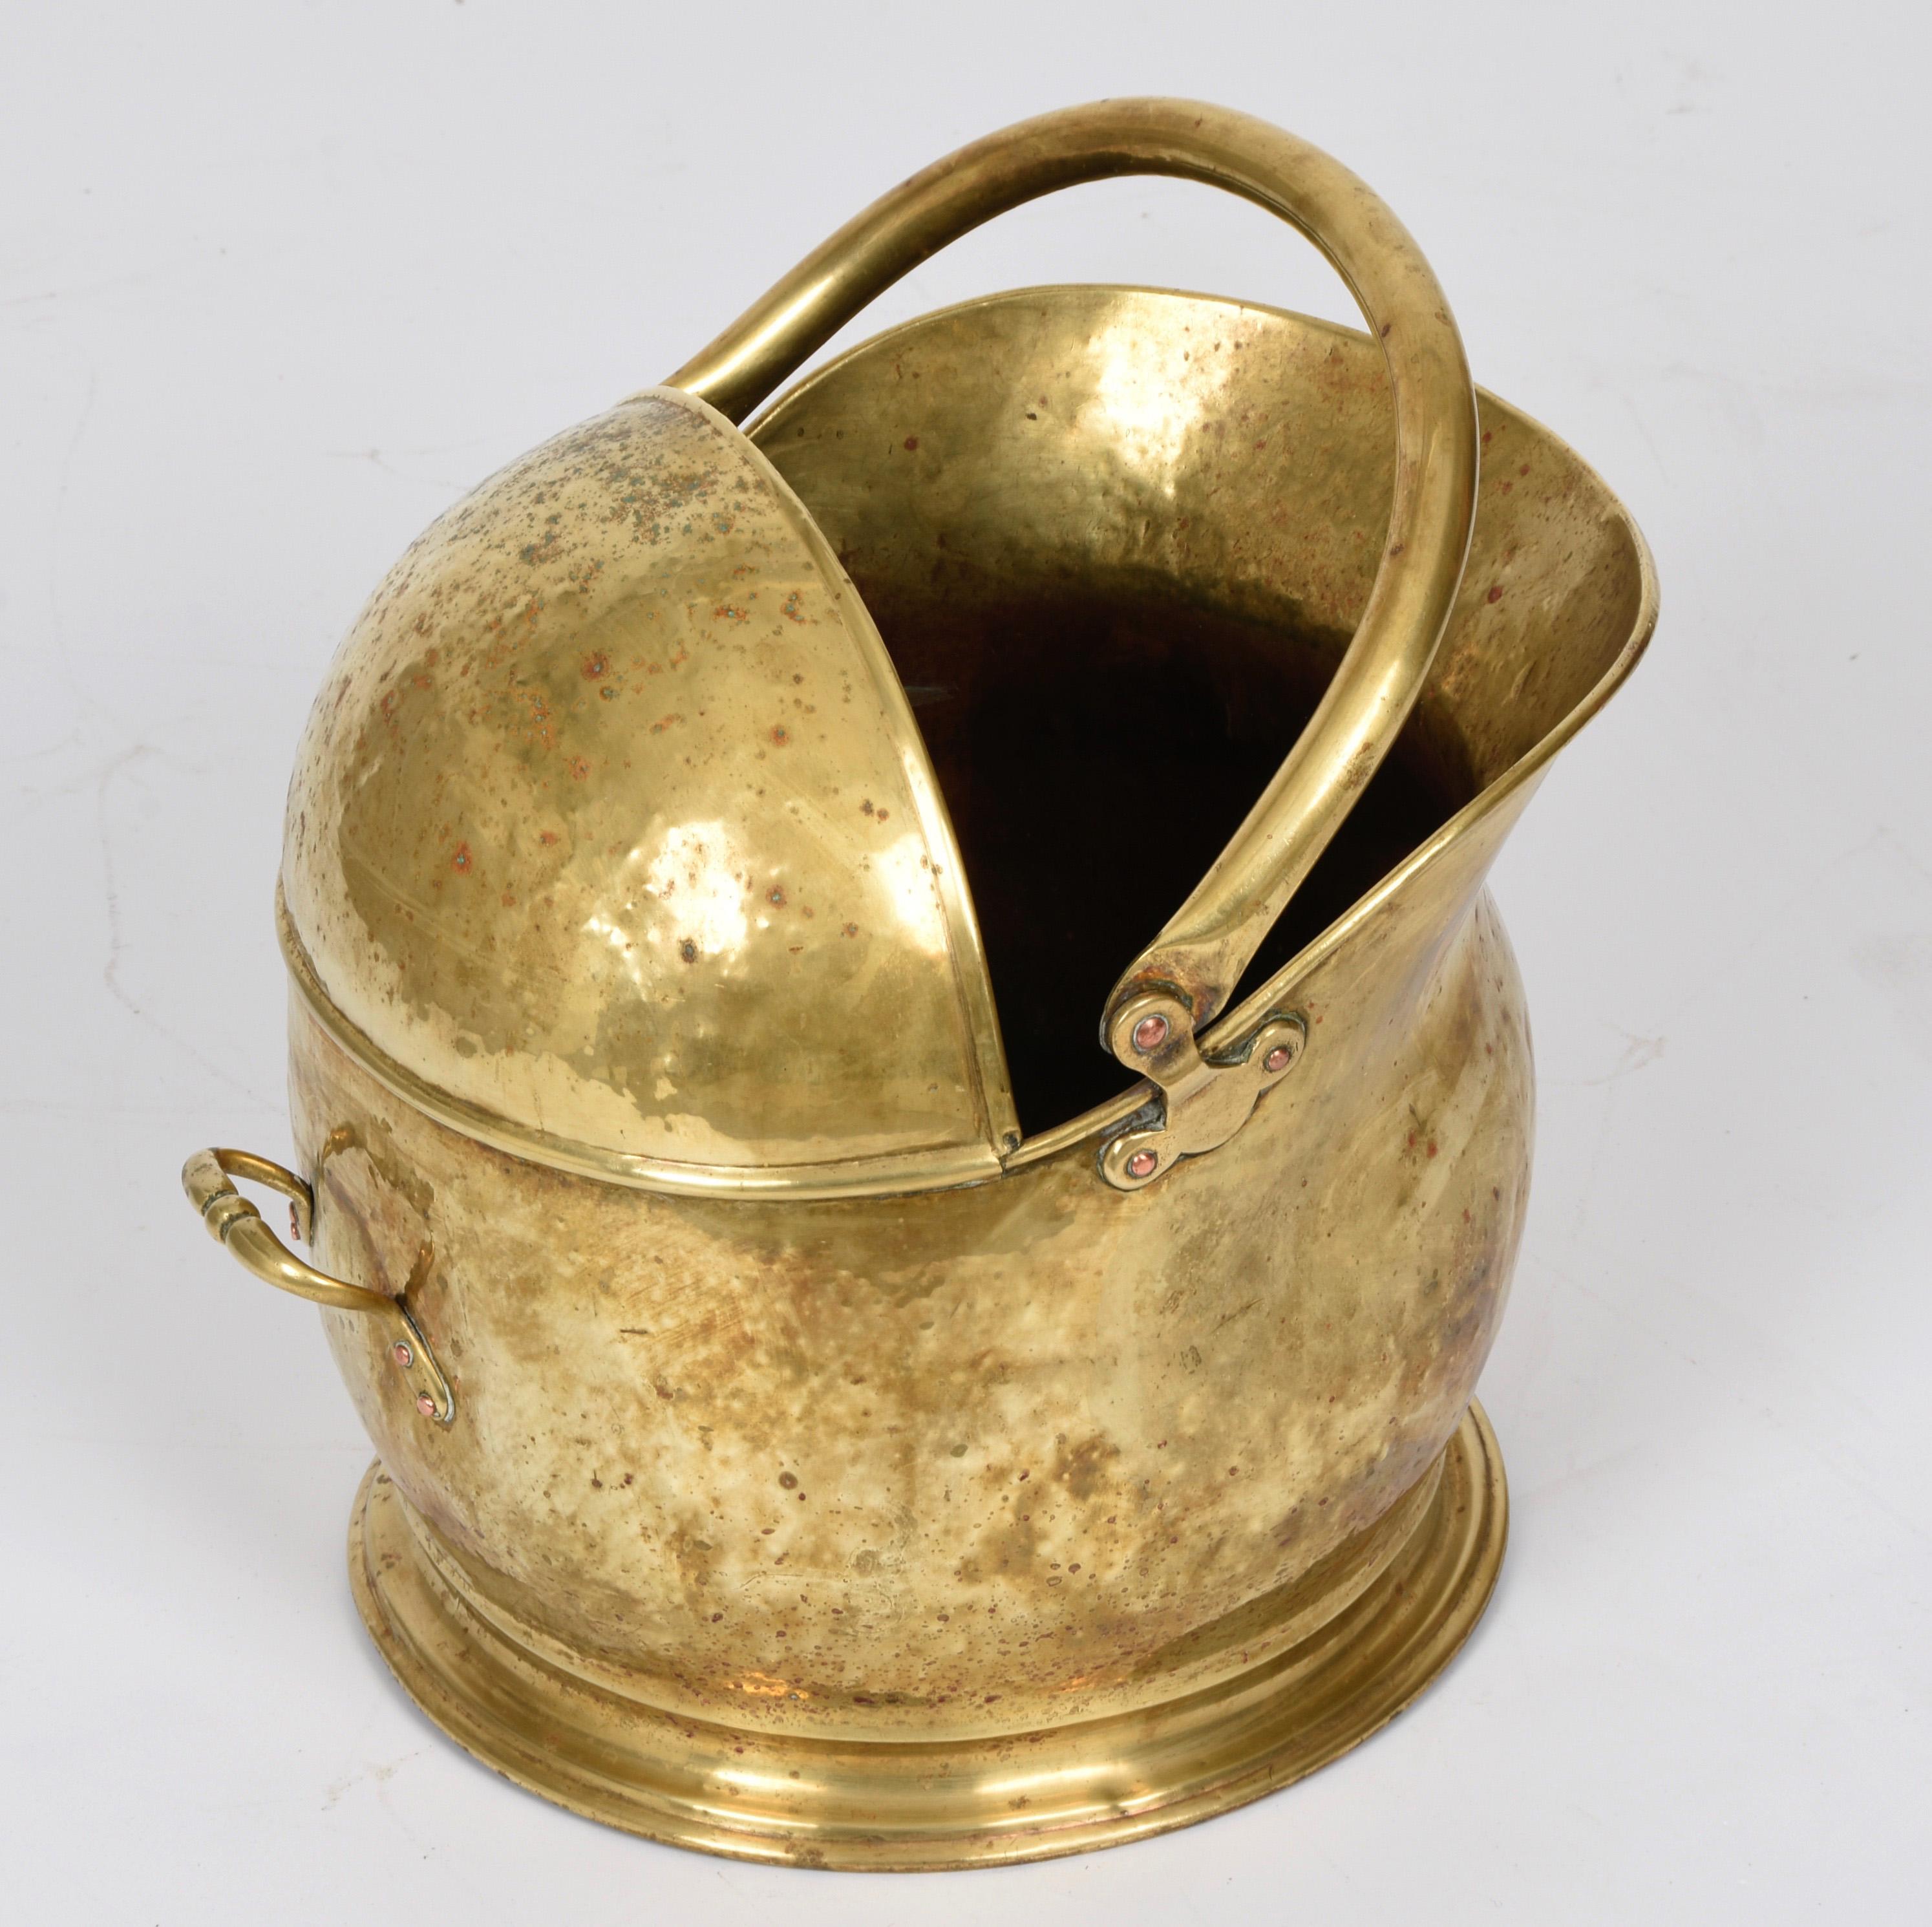 Hammered Helmet-shaped brass coal bucket from the early 1900s, Italy, 1930s